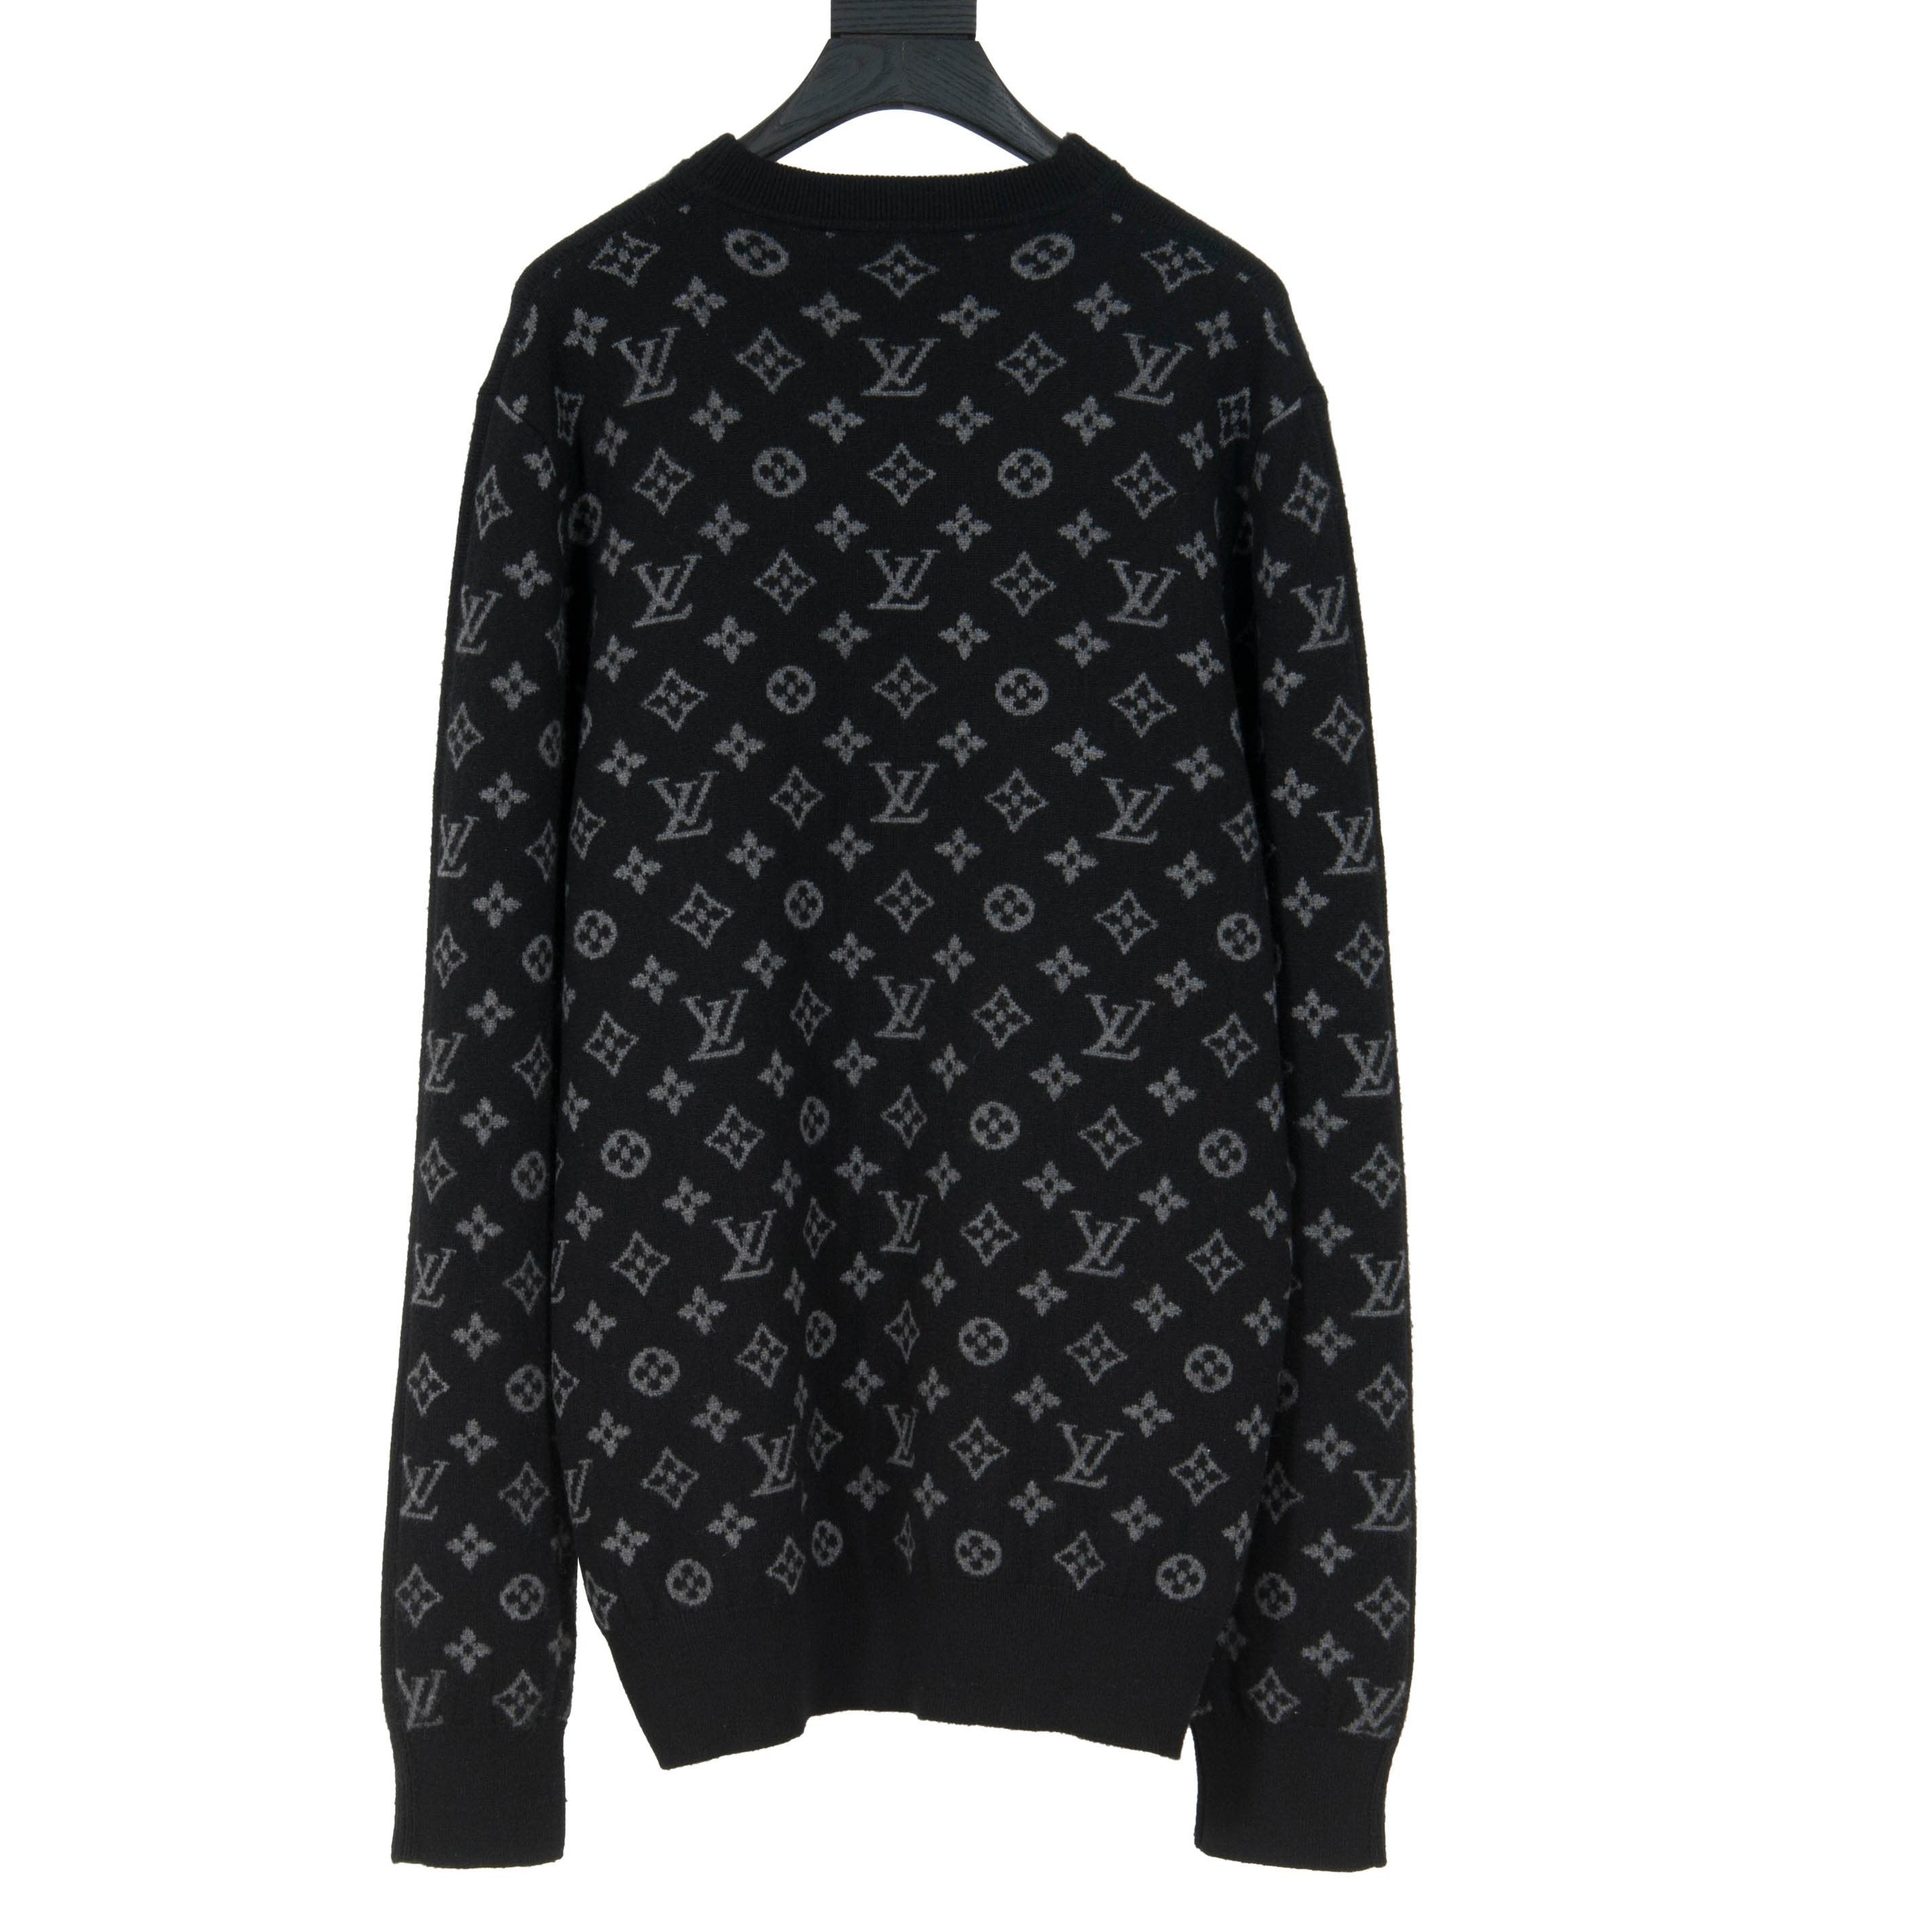 Products By Louis Vuitton: Half And Half Monogram Crew Neck